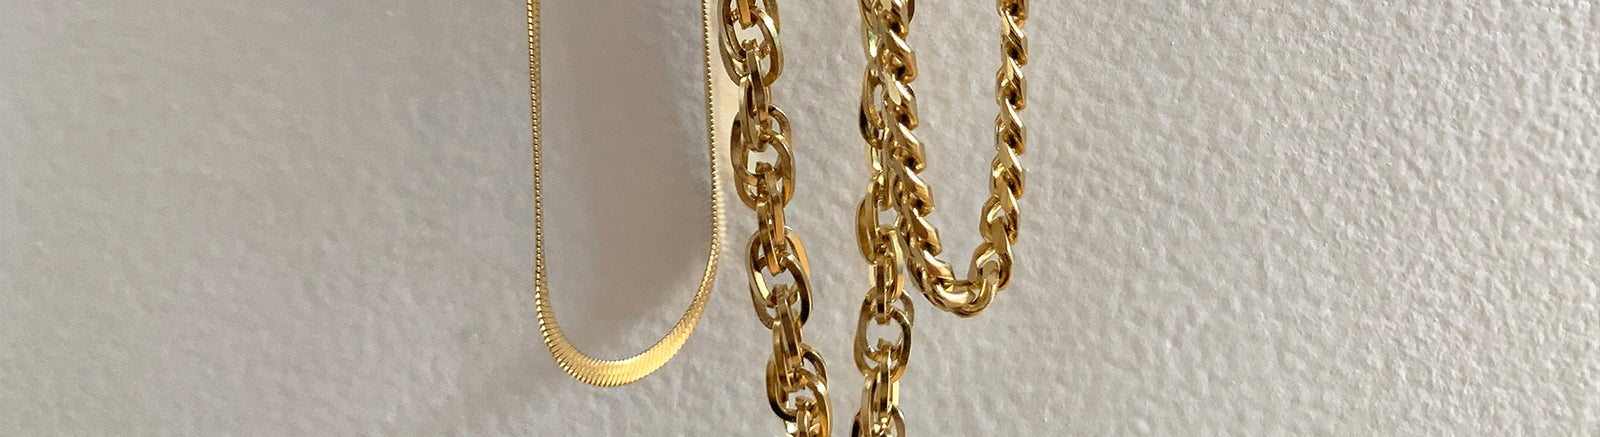 gold chain necklaces waterproof jewelry tarnish free high quality